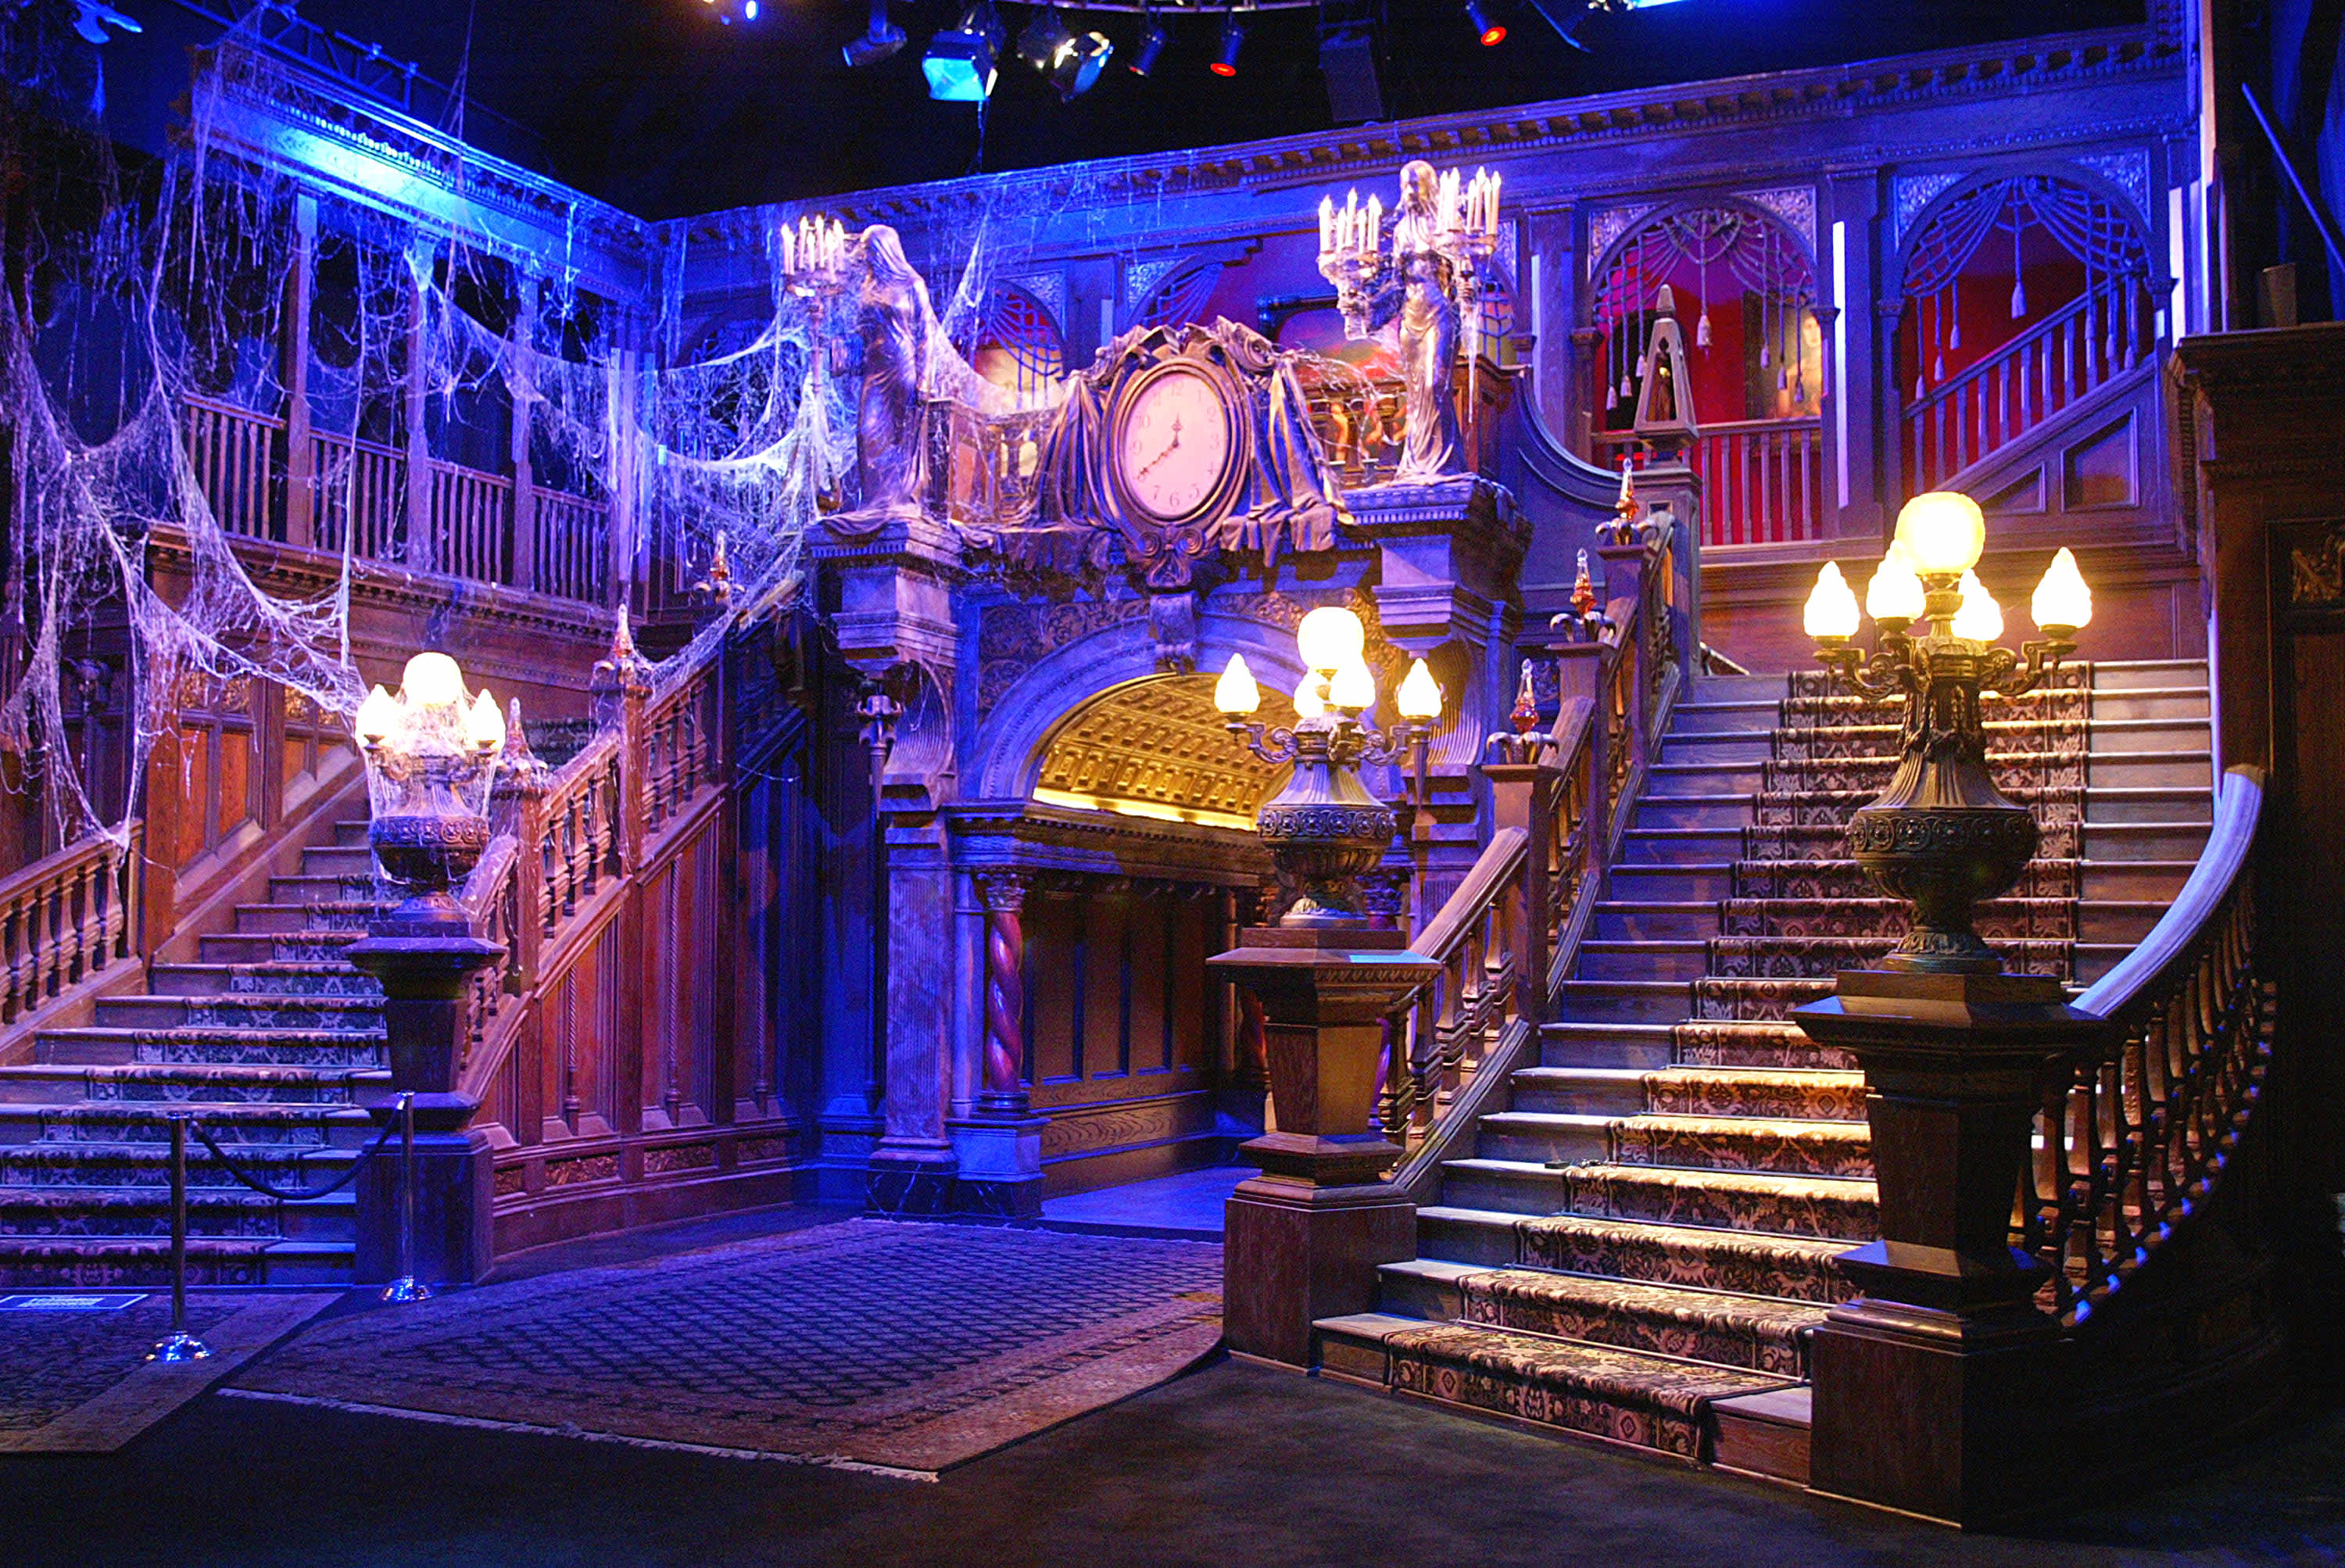 This Disney Fan Converts Their House into the Haunted Mansion ...